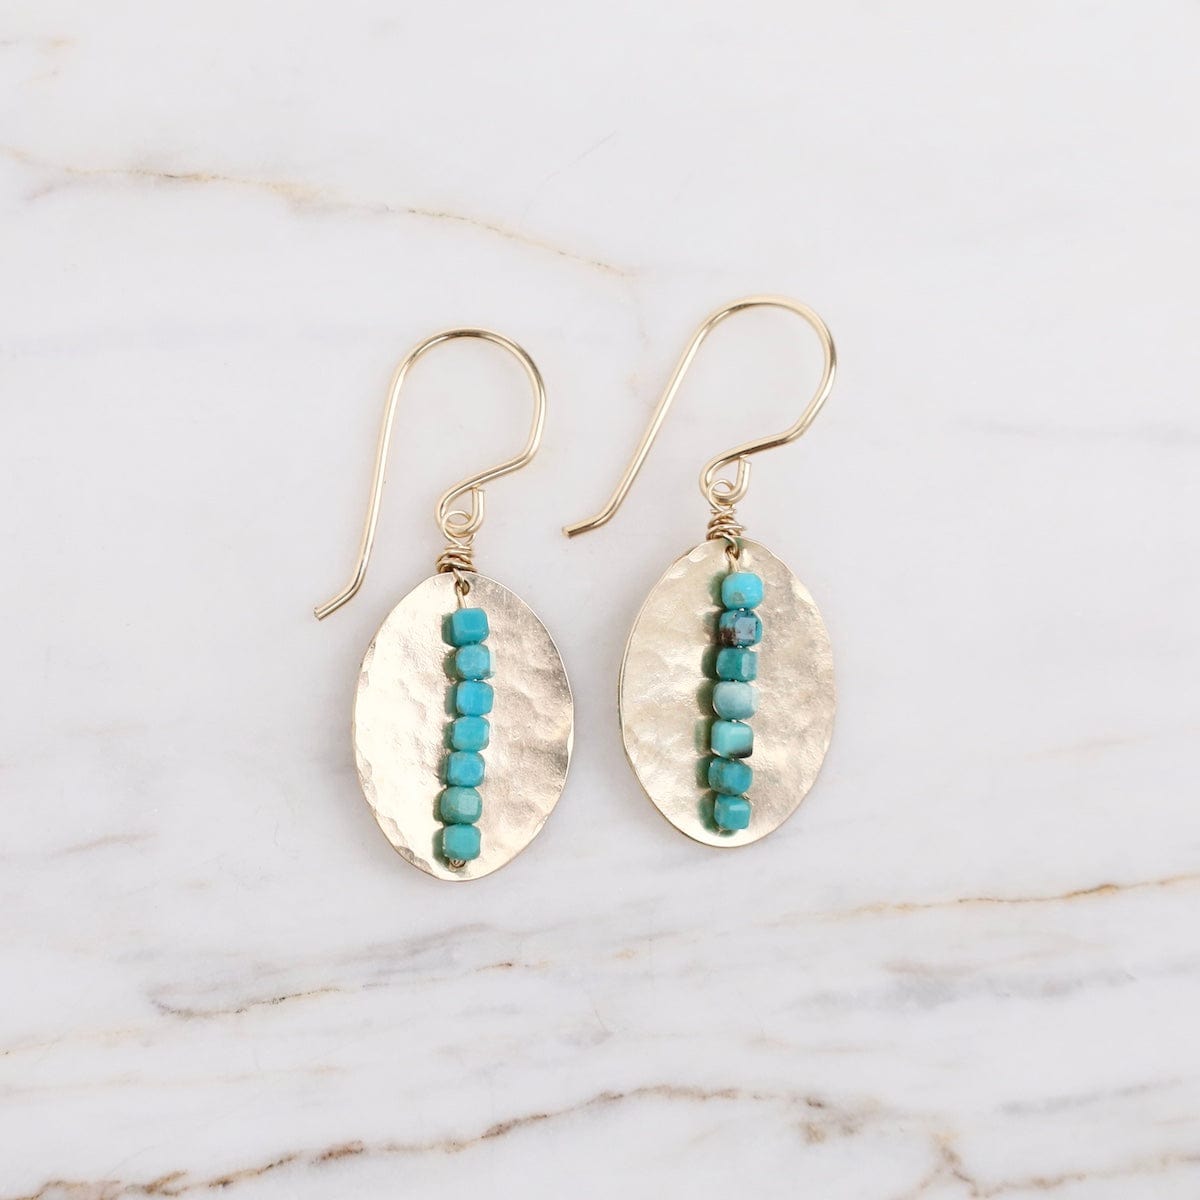 EAR-GF Gold Oval Disc with Small Turquoise Earrings